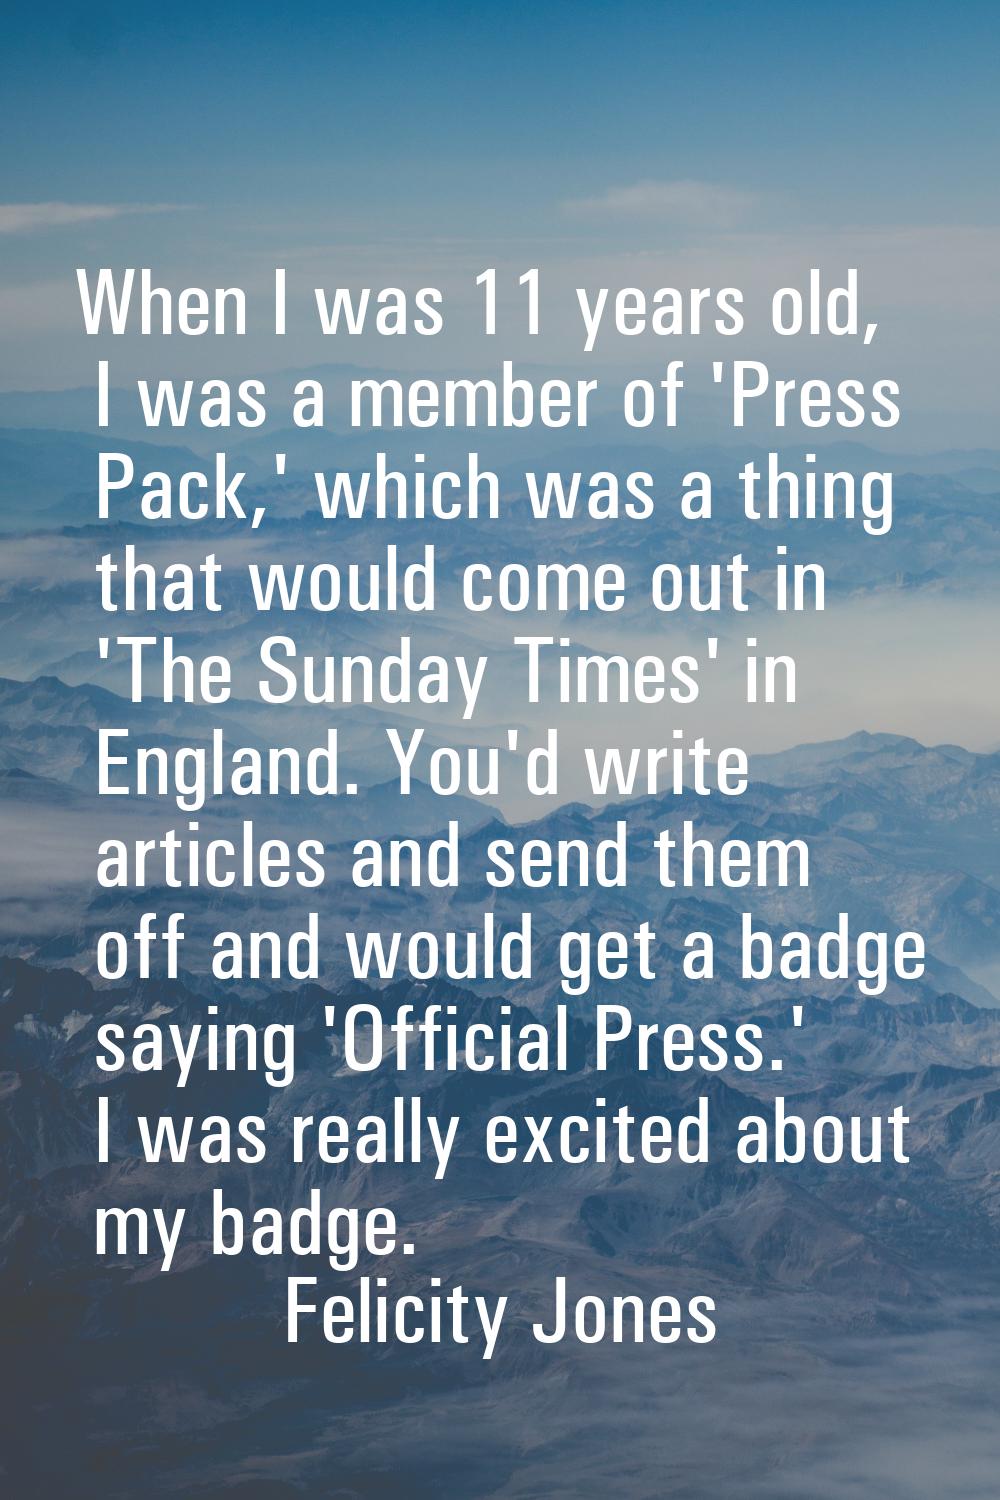 When I was 11 years old, I was a member of 'Press Pack,' which was a thing that would come out in '